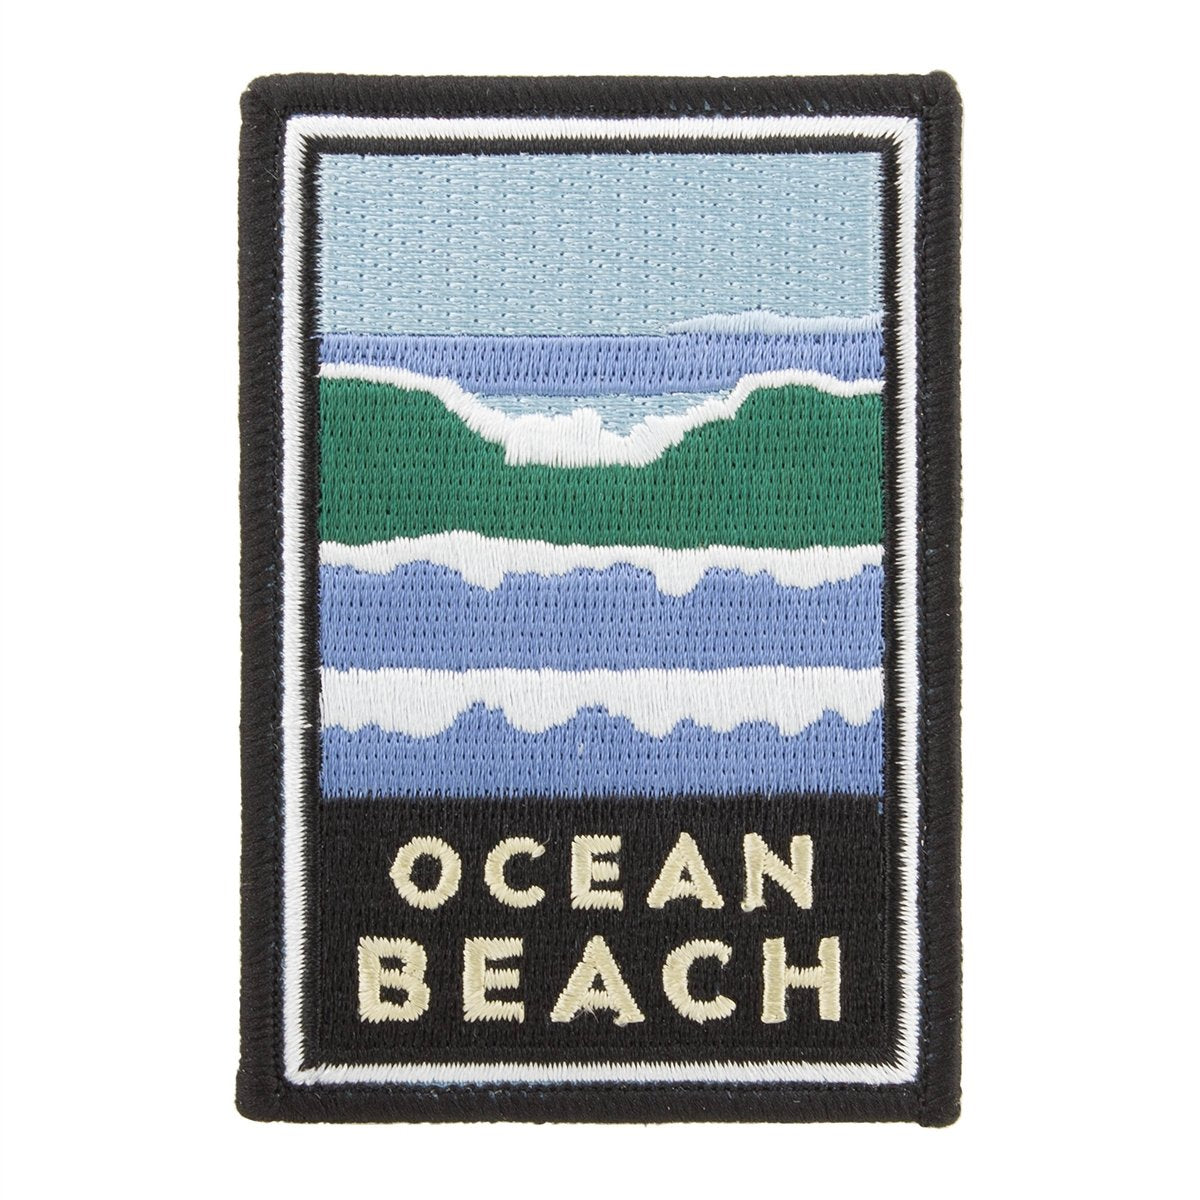 Multicolor embroidered patch featuring San Francisco Ocean Beach design, based on artwork by Michael Schwab.